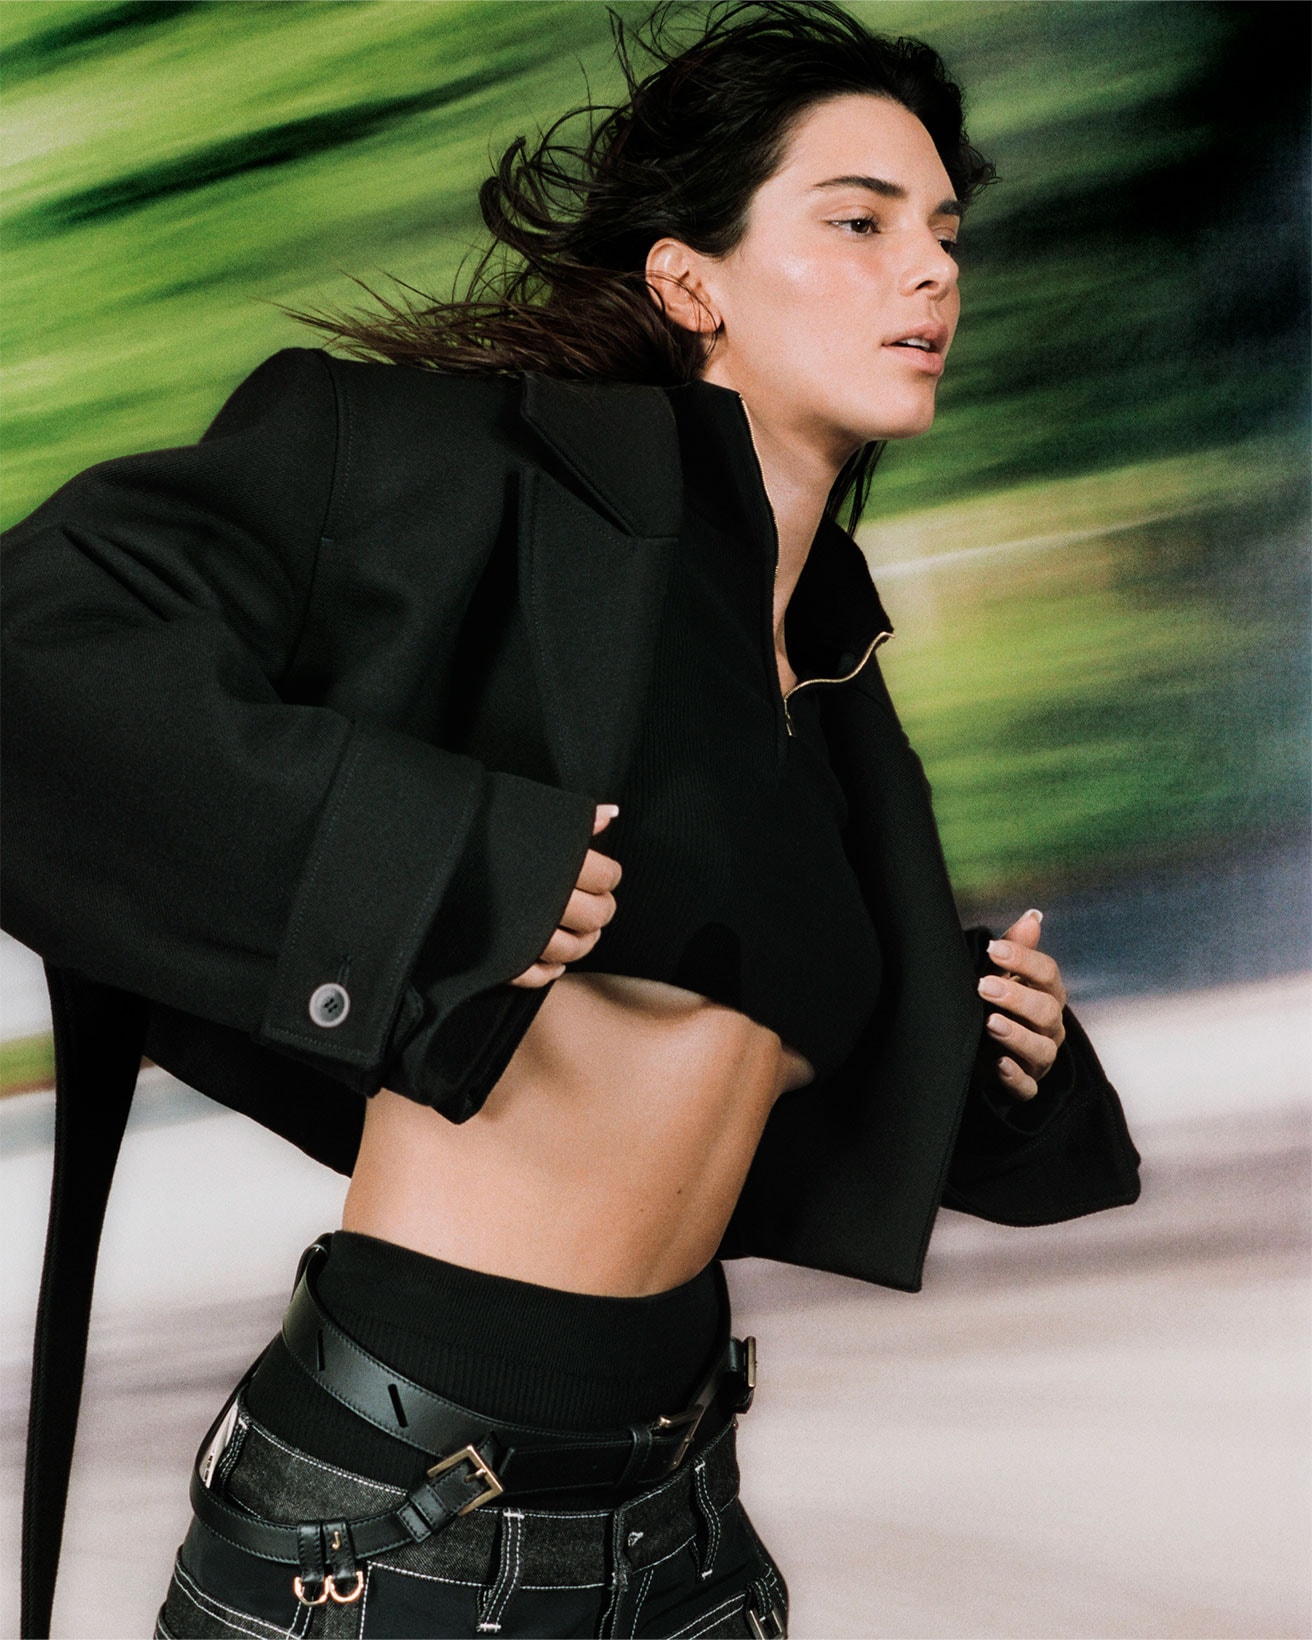 Jacquemus La Montagne Kendall Jenner Campaign Running Jacket Cropped